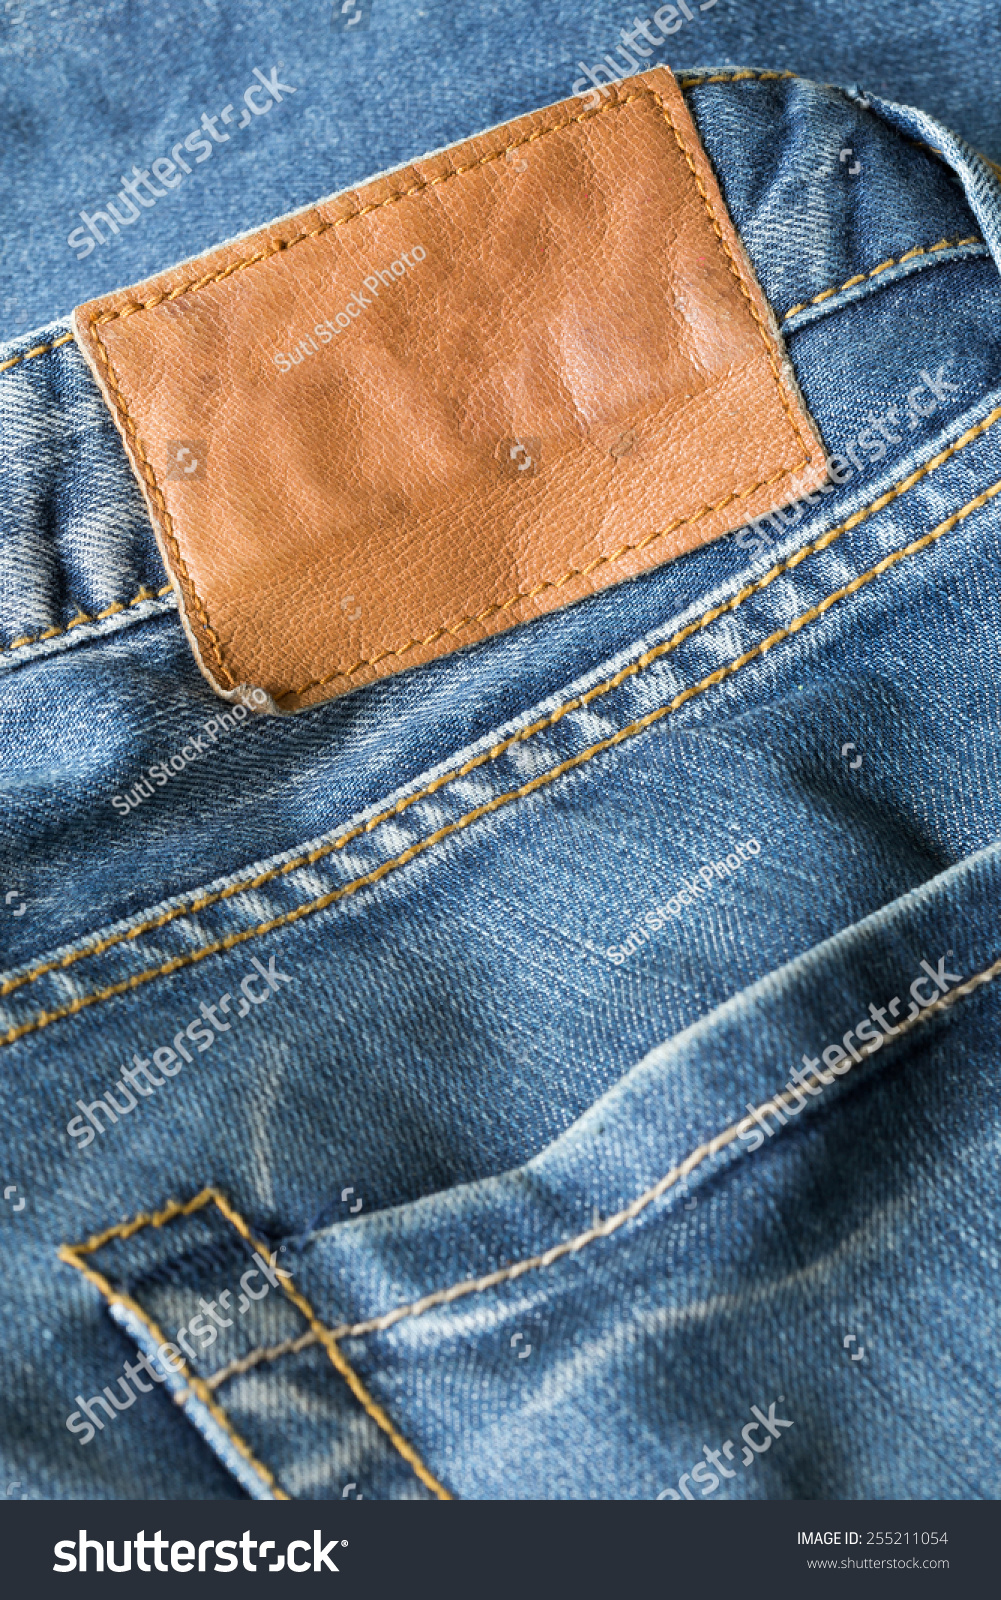 Brown Leather Tag On Blue Jeans Stock Photo 255211054 | Shutterstock